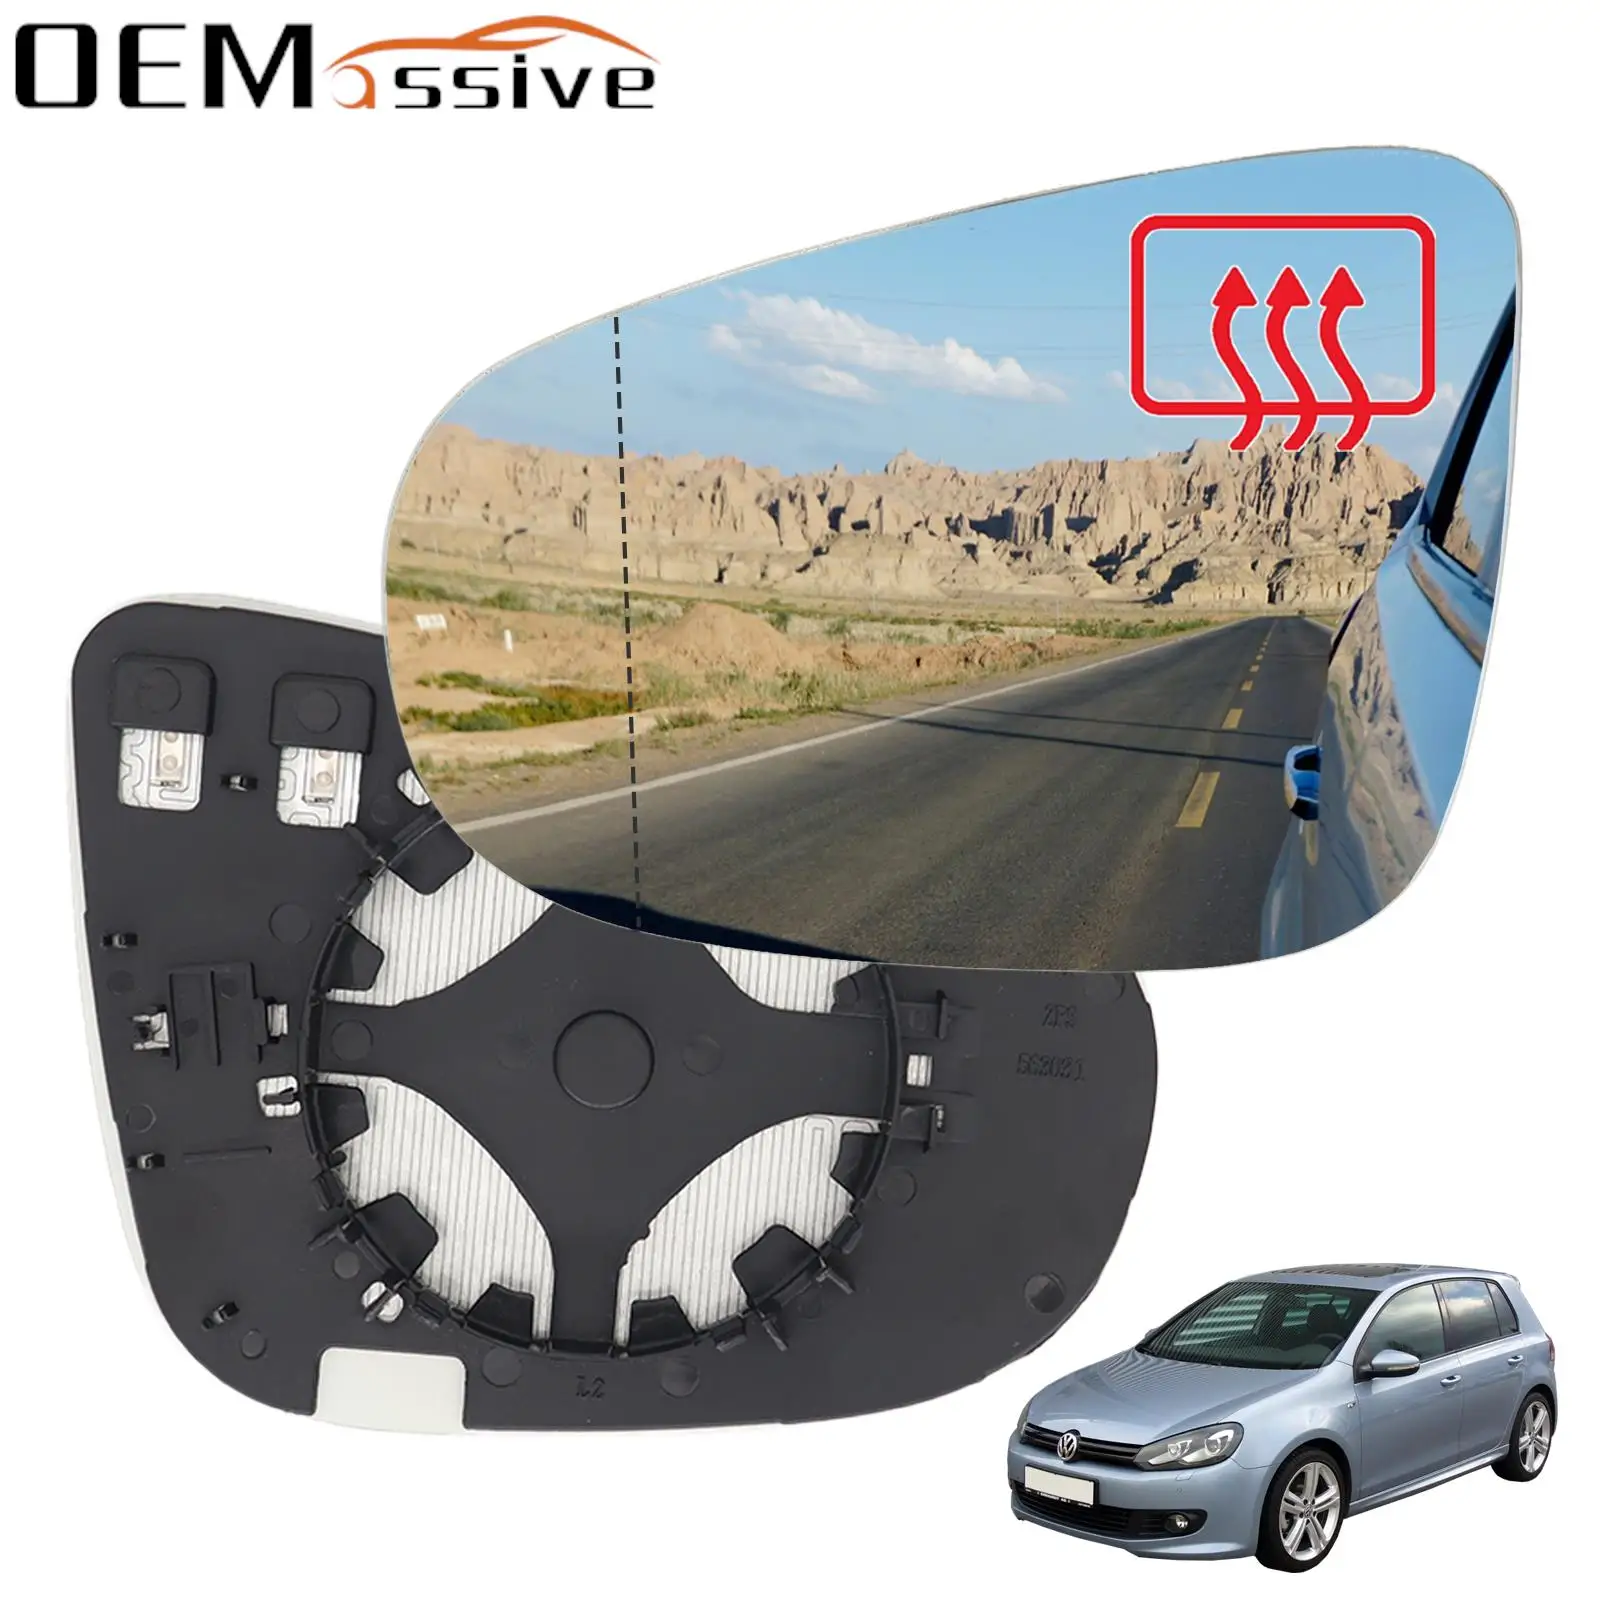 

Heated Side Rearview Car Mirror Side Wing Mirrors Glass Cover Mirror Housing Car Accessories Convex For VW Golf 6 MK6 2009-2012